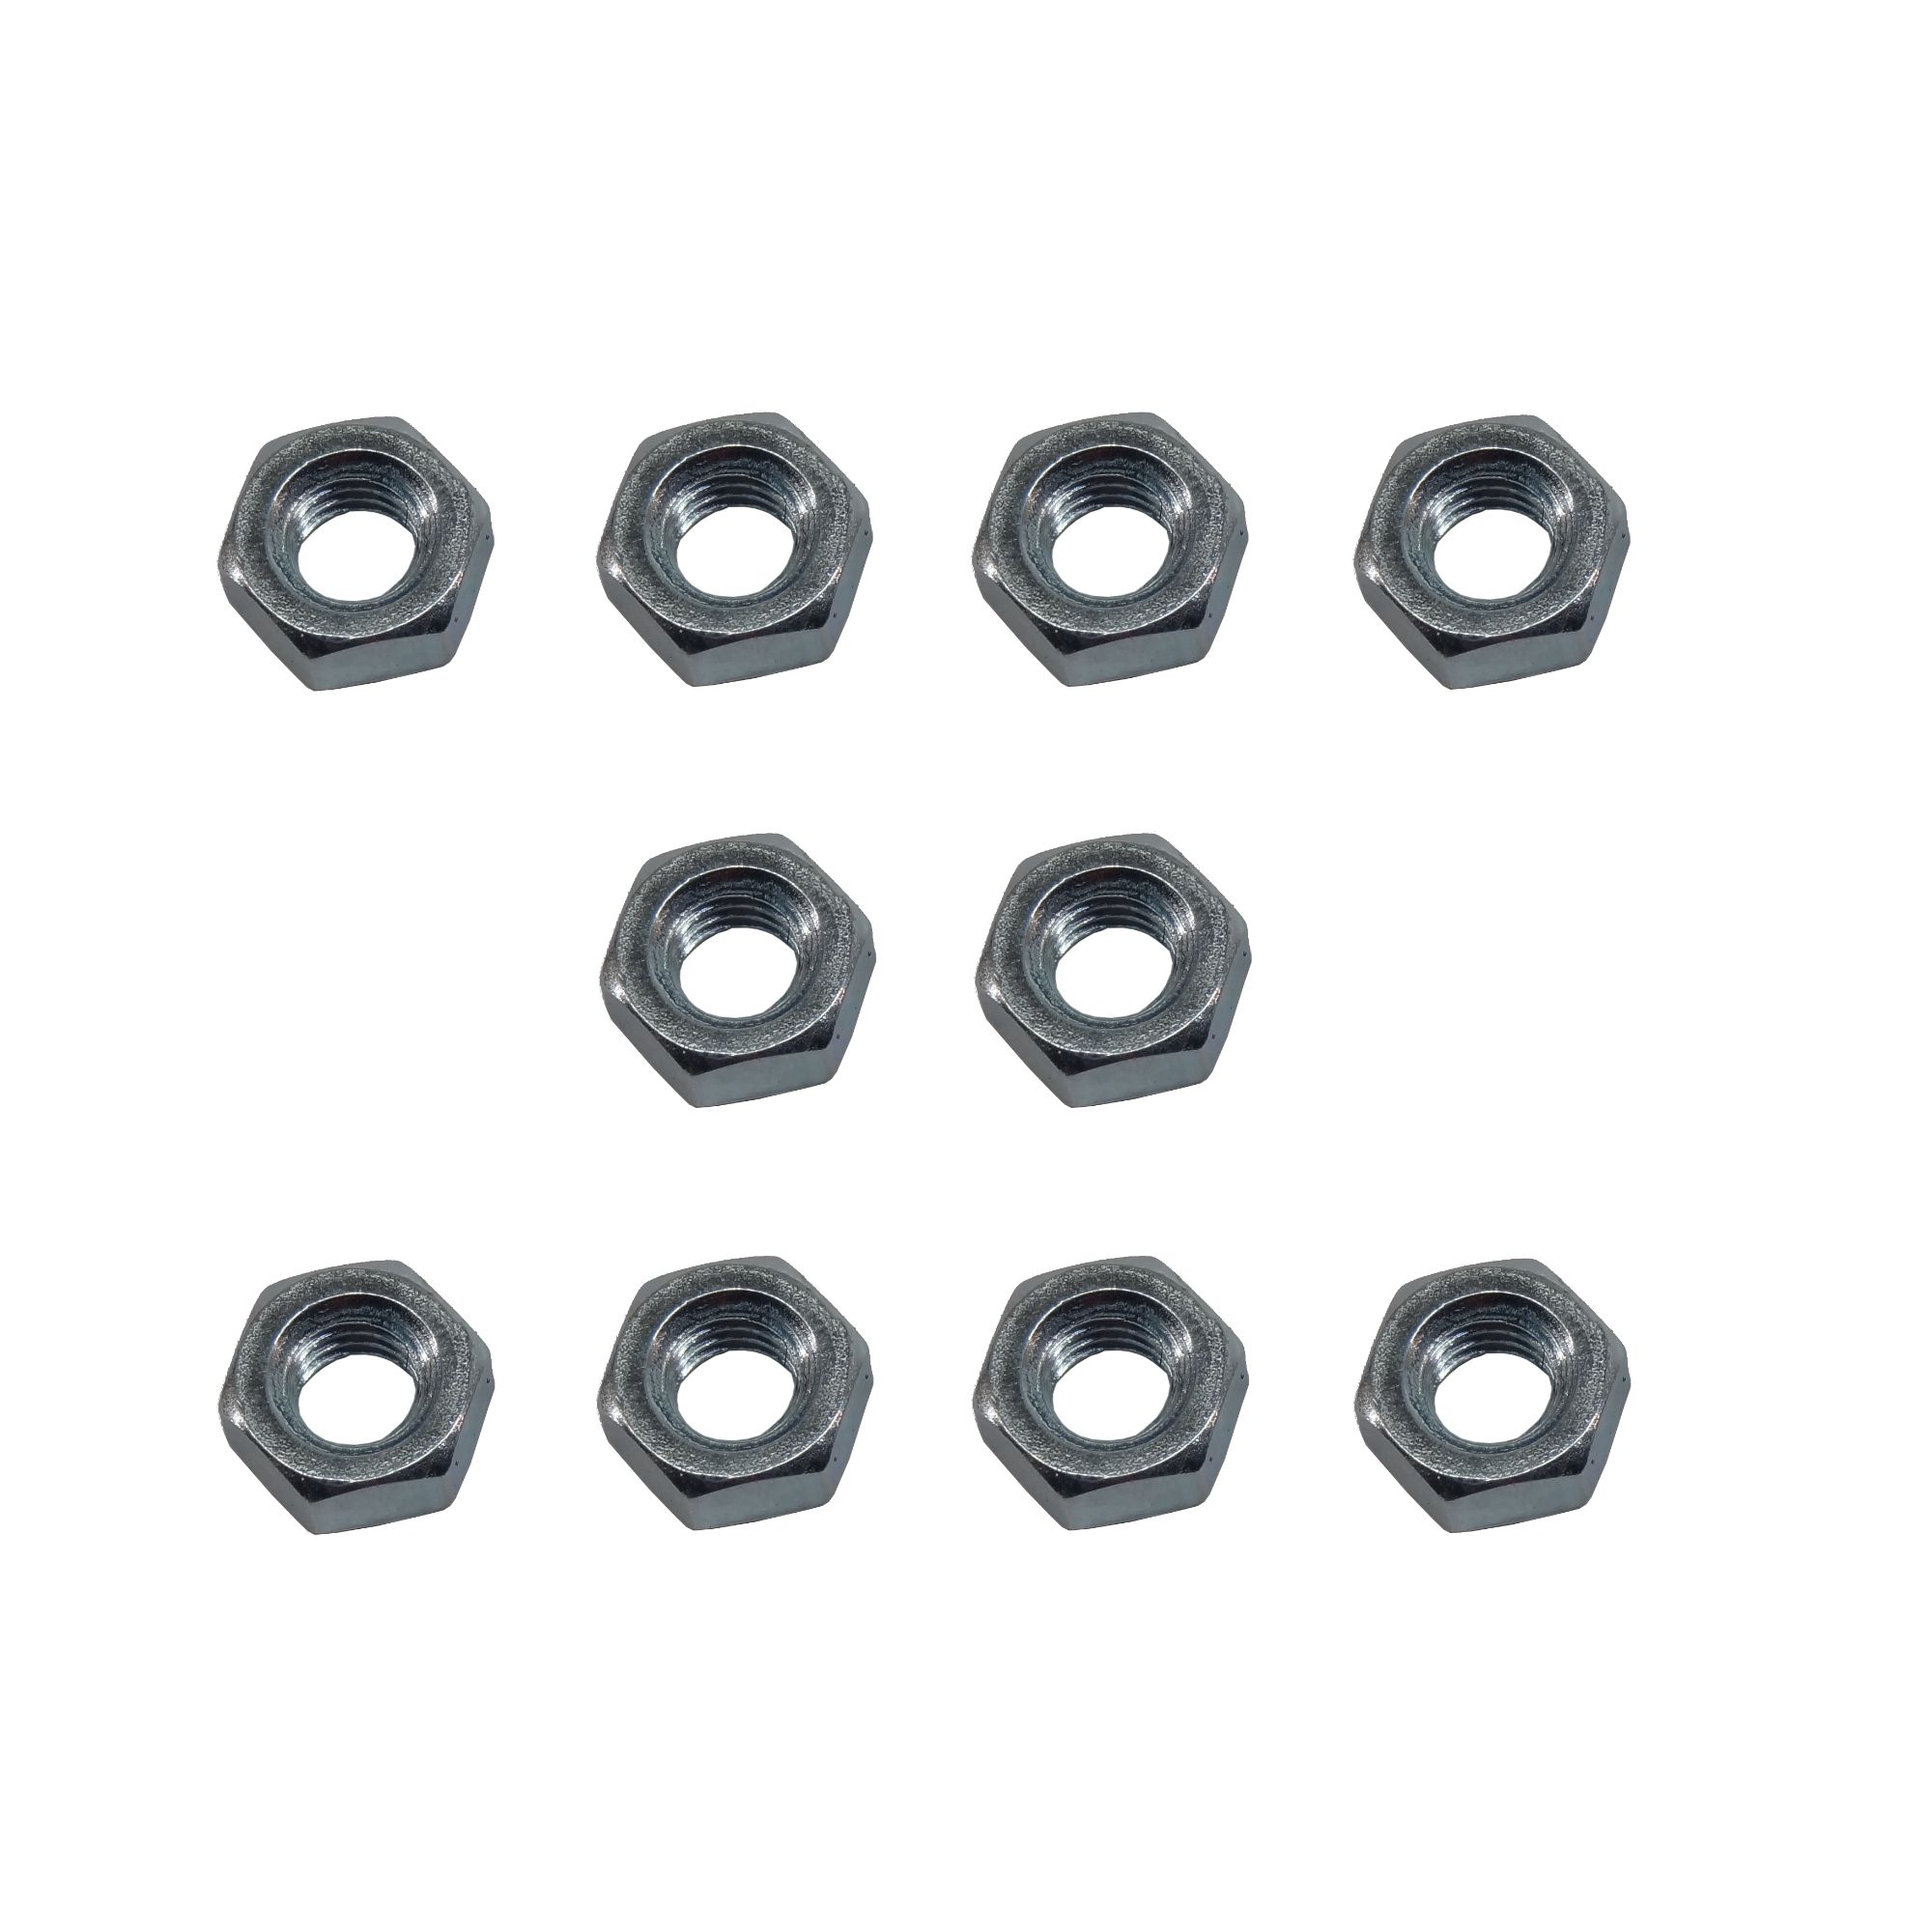 M6 (10mm) Hex Nuts 6 Pack